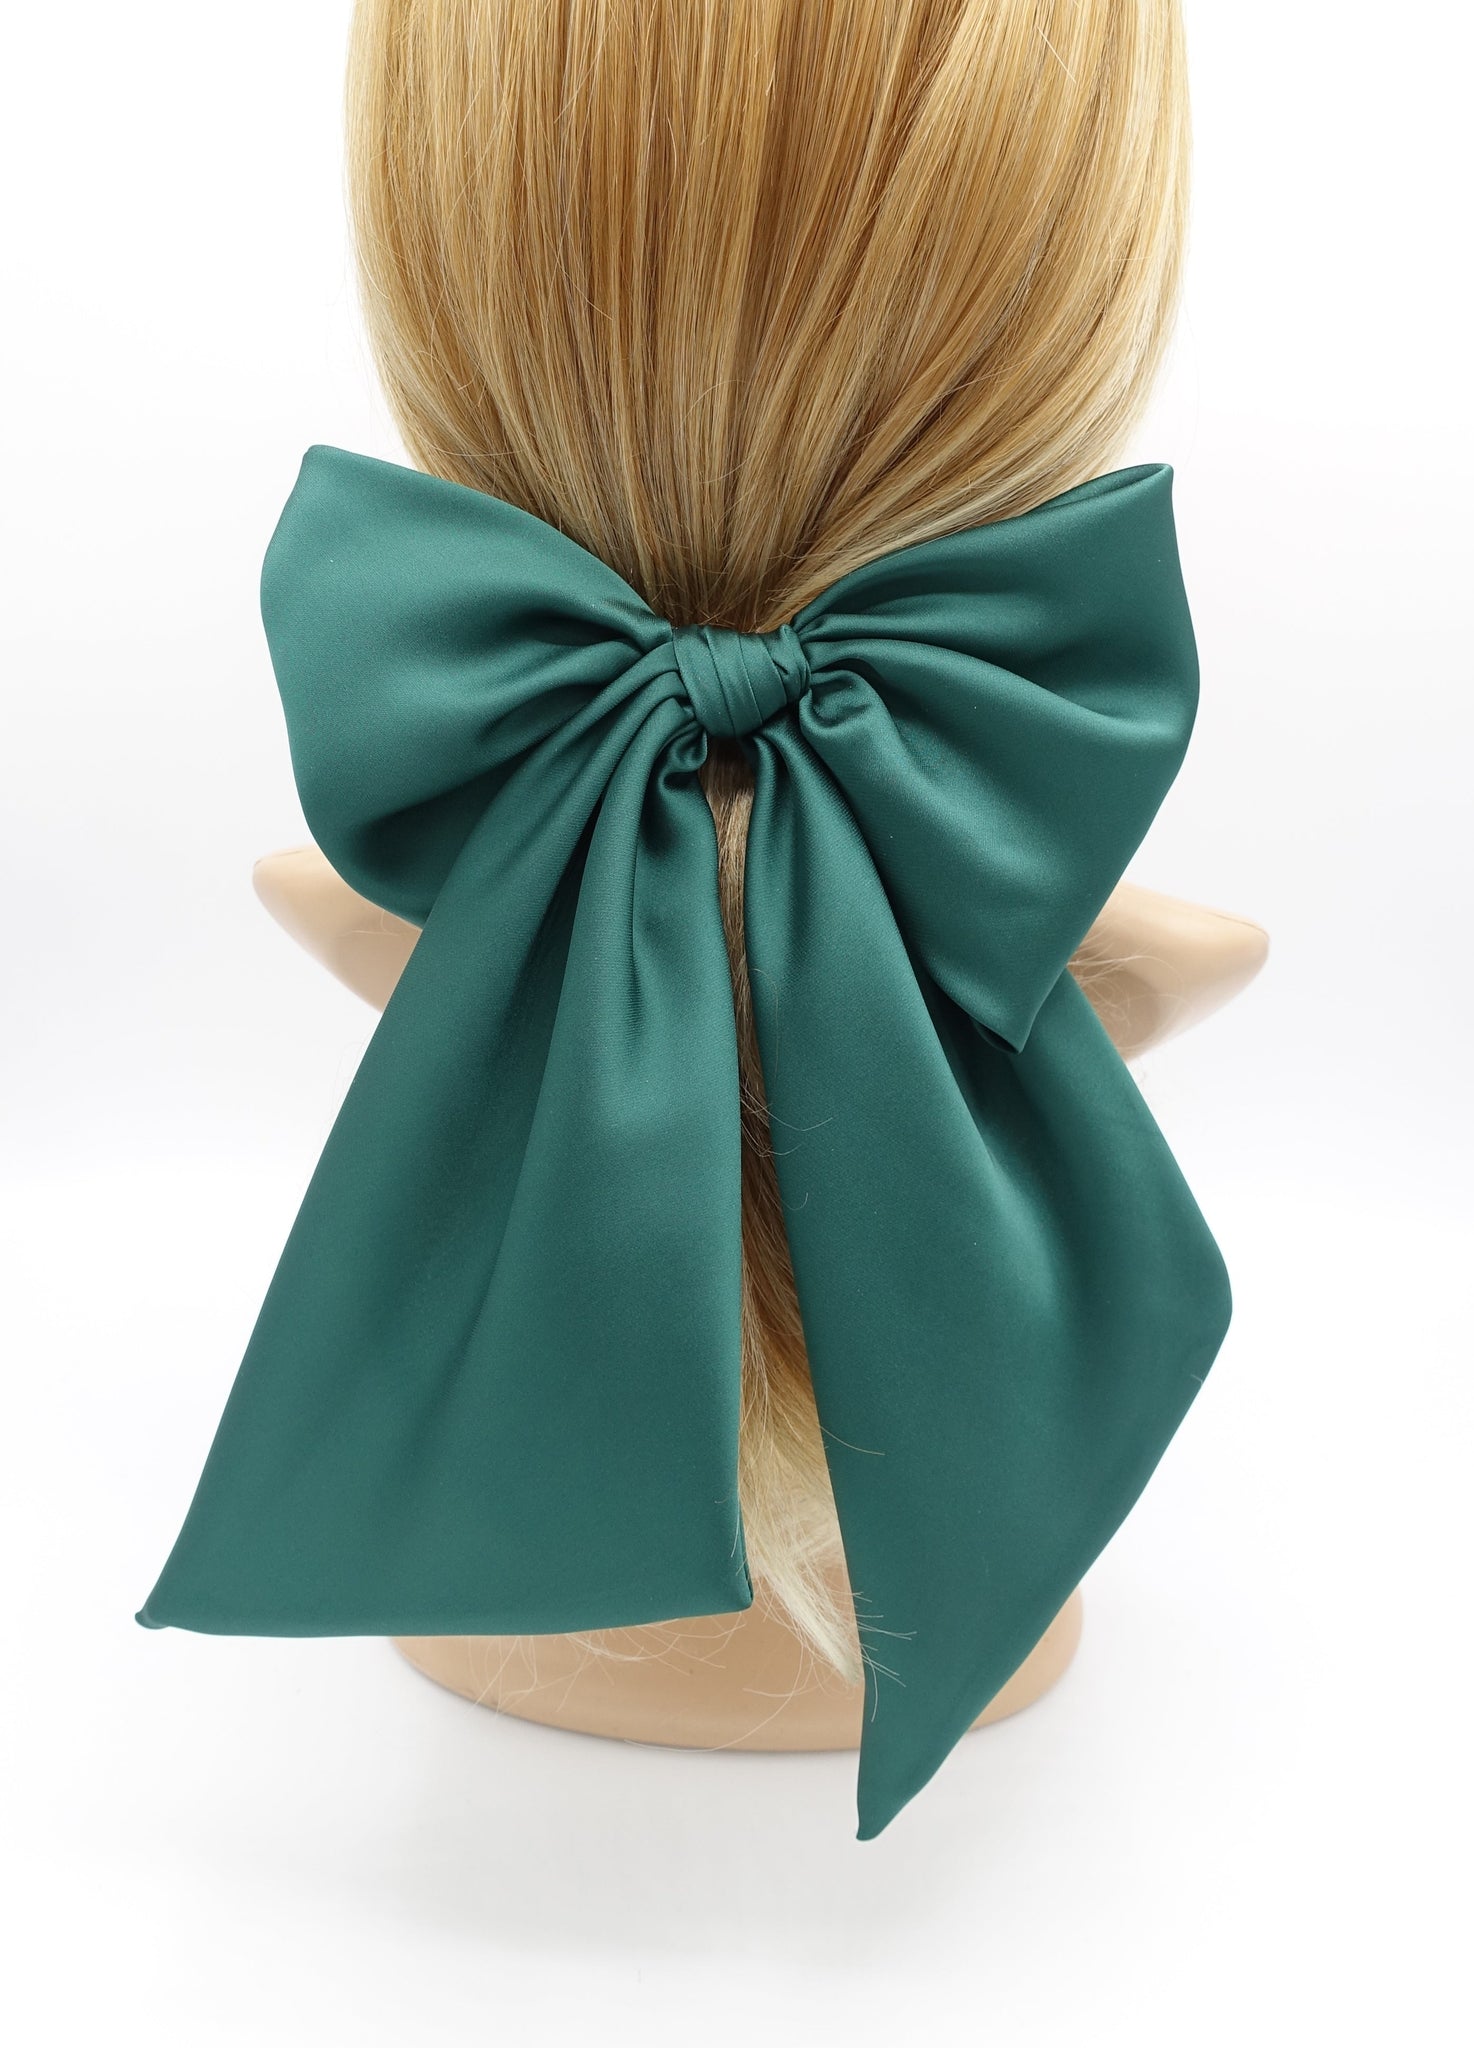 green satin giant hair bow french barrette wide tail oversized women hair accessory